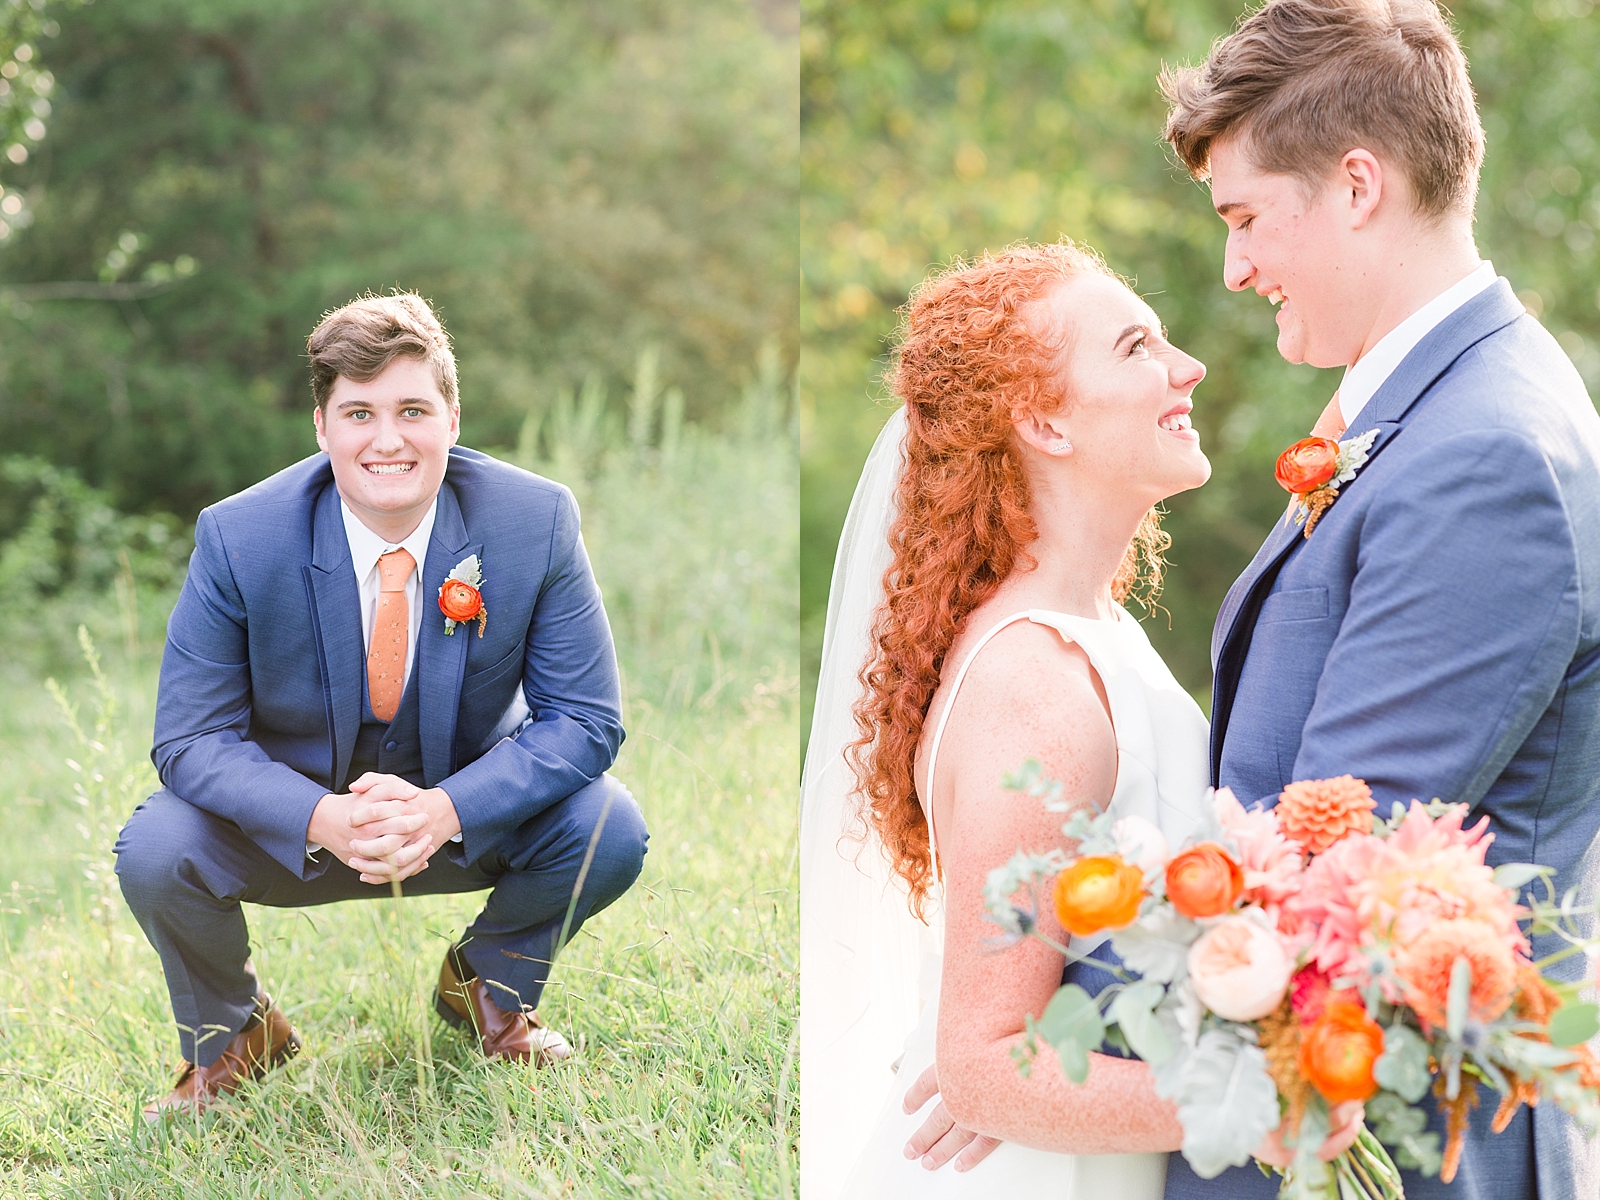 Chestnut Ridge Wedding groom squatting smiling and bride and groom laughing at each other Photos